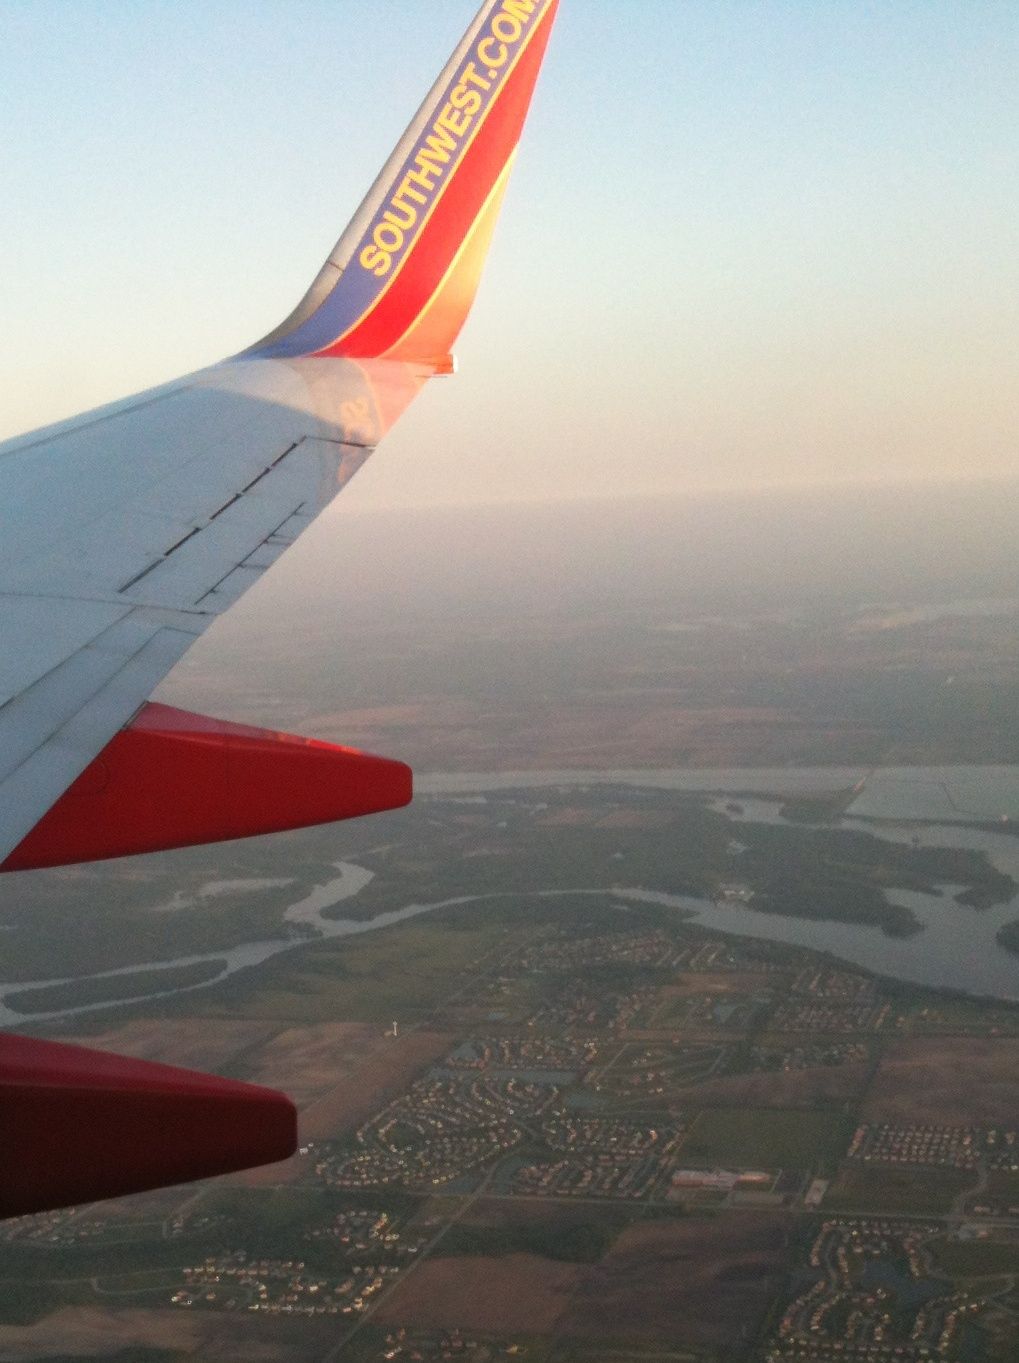 Boeing 737-700 — - On our way into Midway, just before Joliet.. My house is somwhere down there...